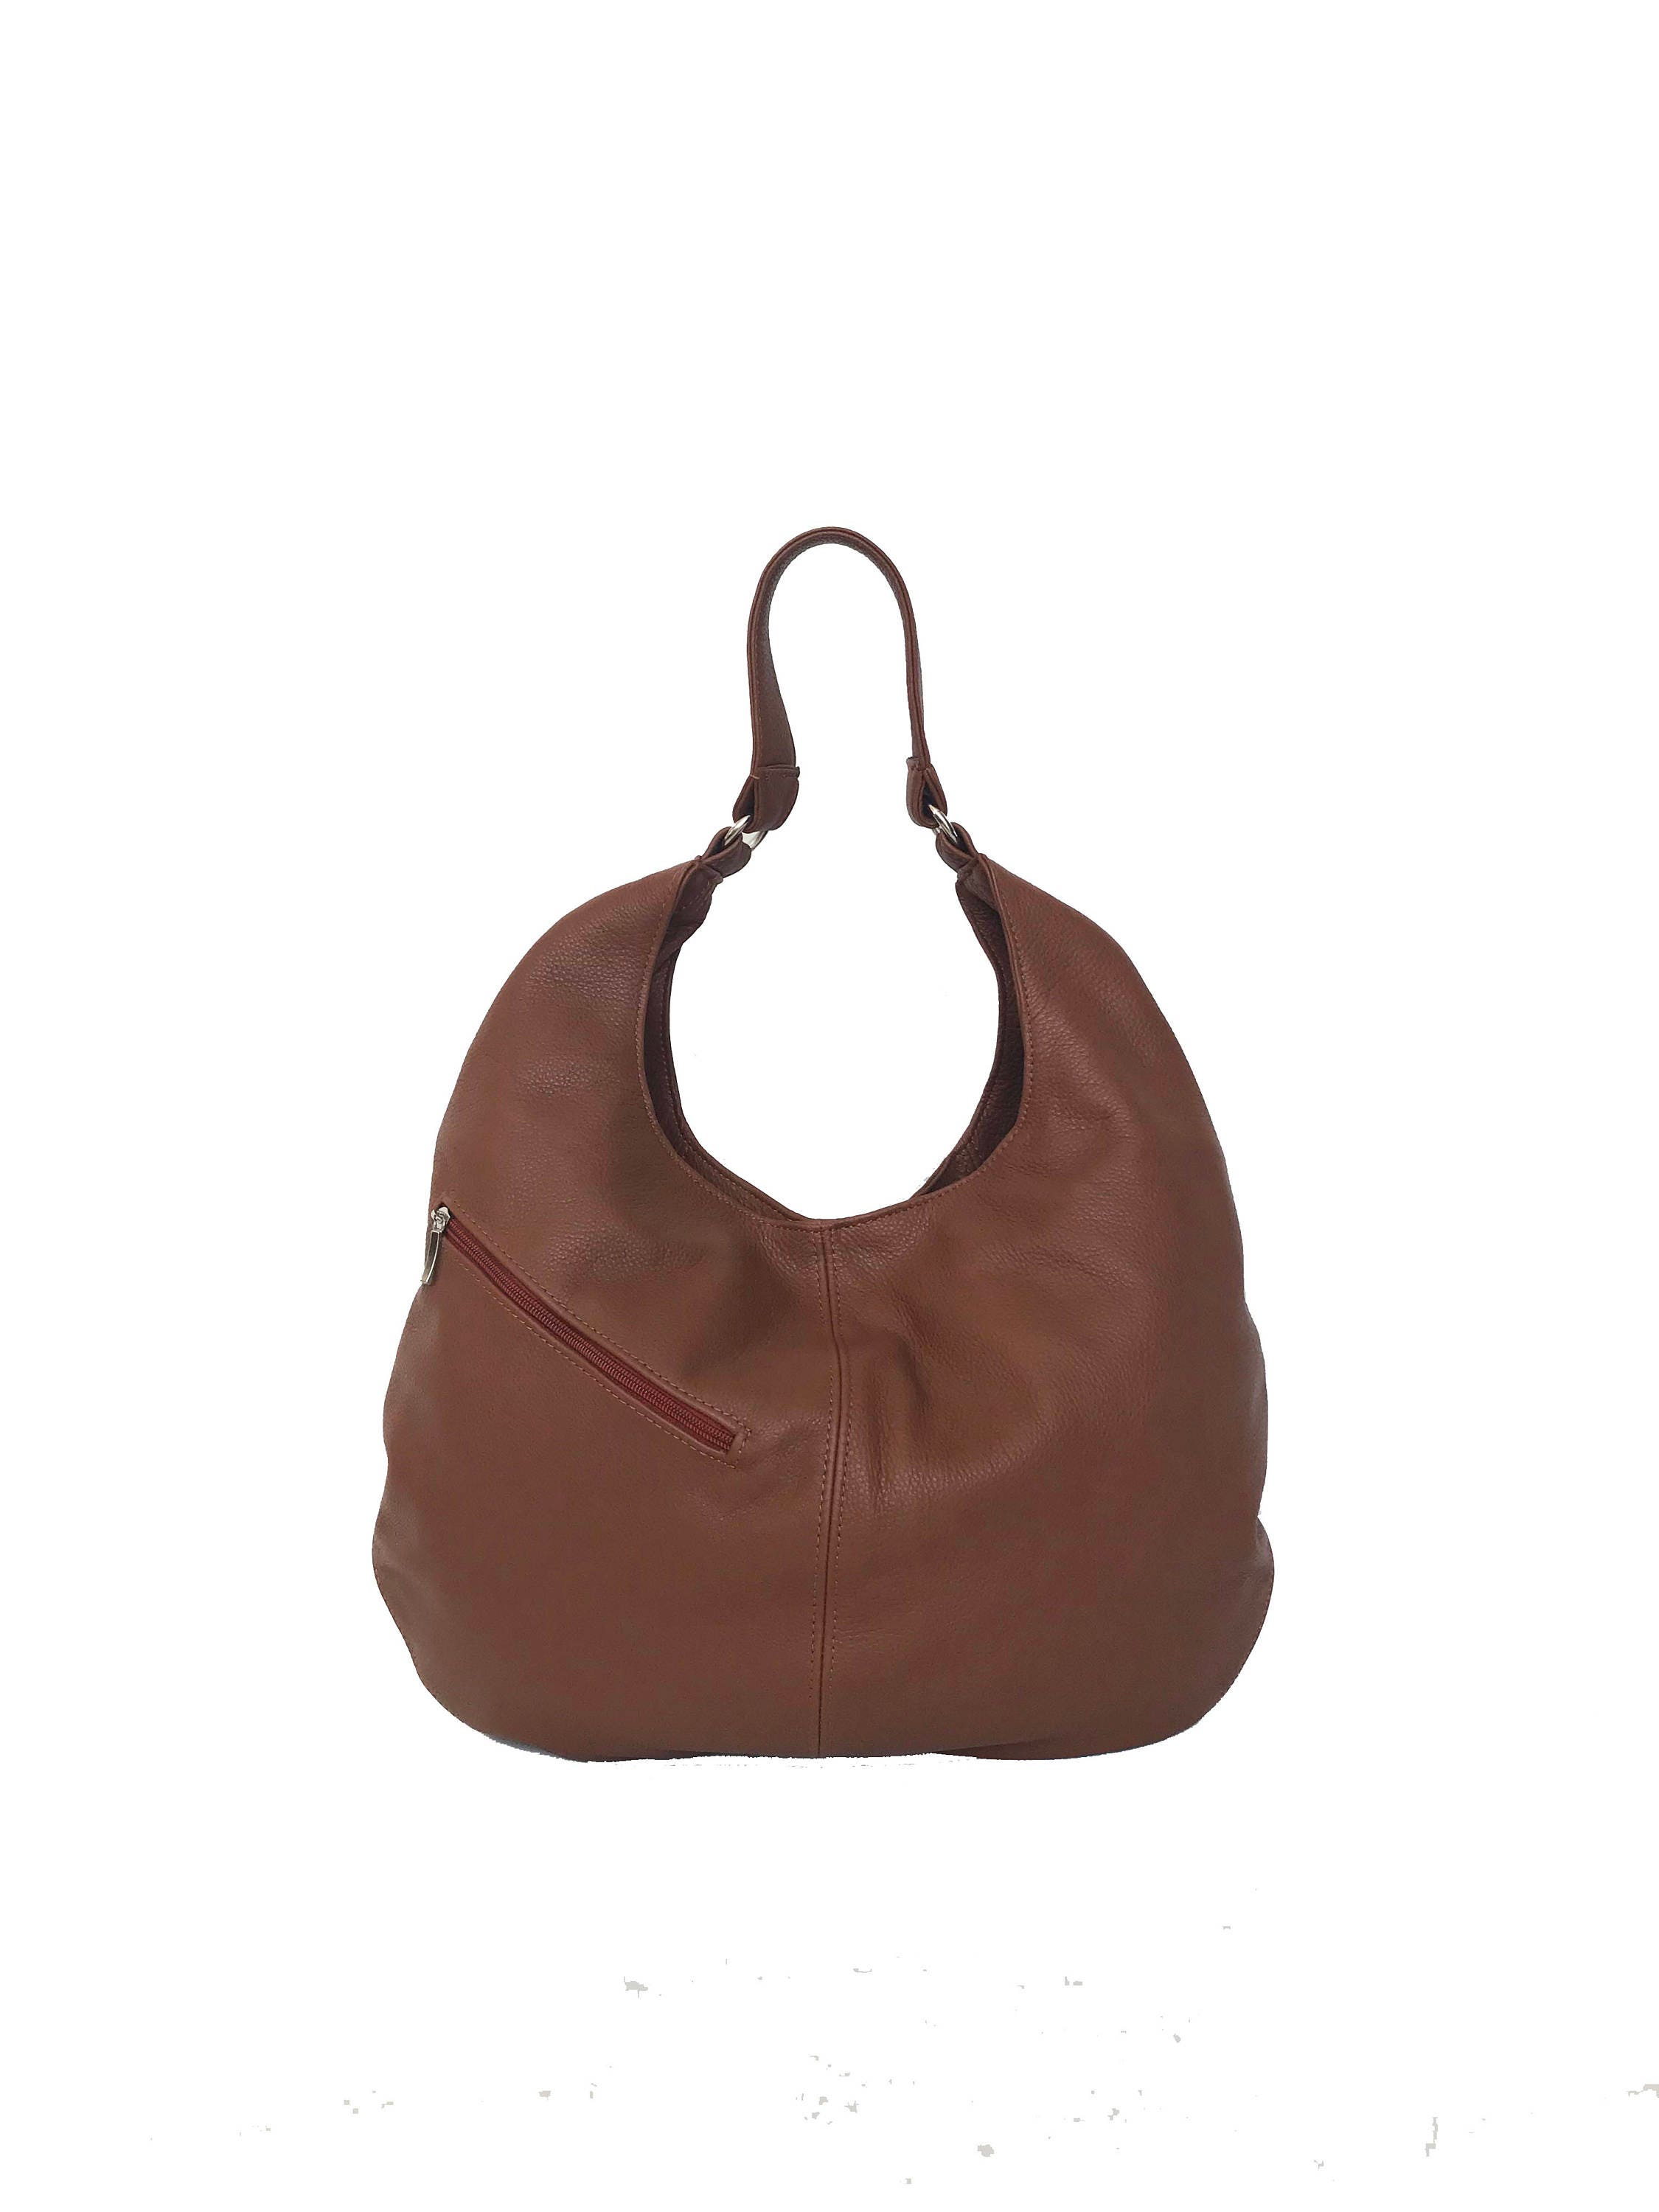 Tan Brown Leather Hobo Bag with Pockets Slouchy Leather